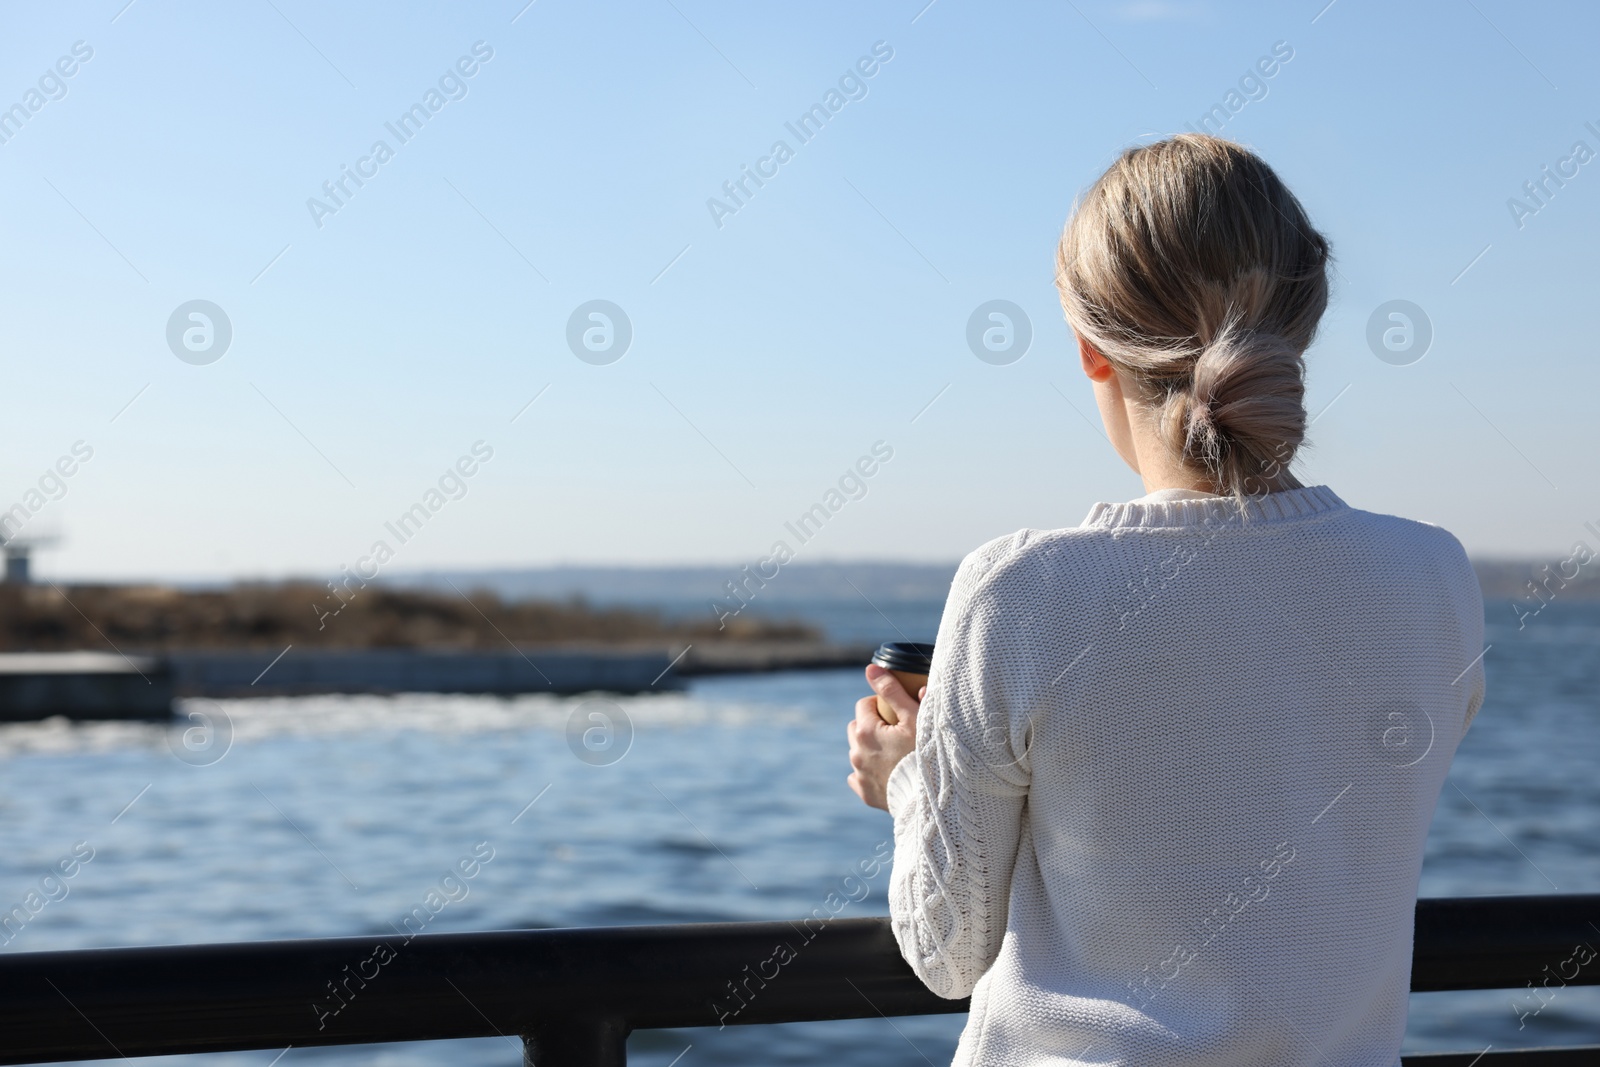 Photo of Lonely woman with cup of drink near river on sunny day, back view